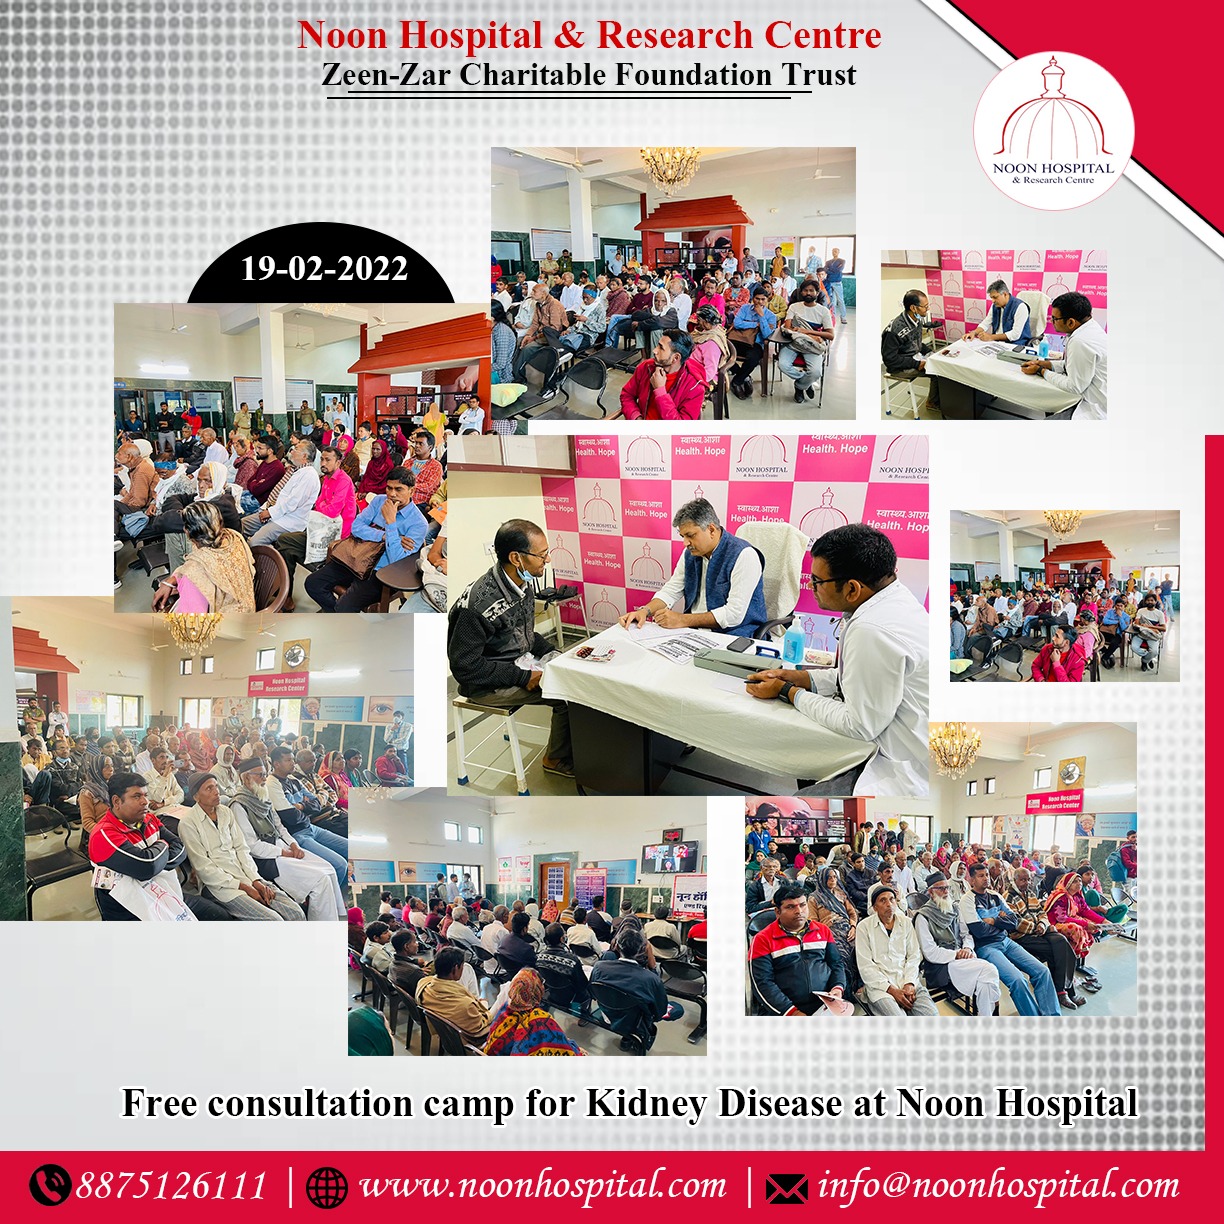 Free consultation camp for Kidney Disease at Noon Hospital